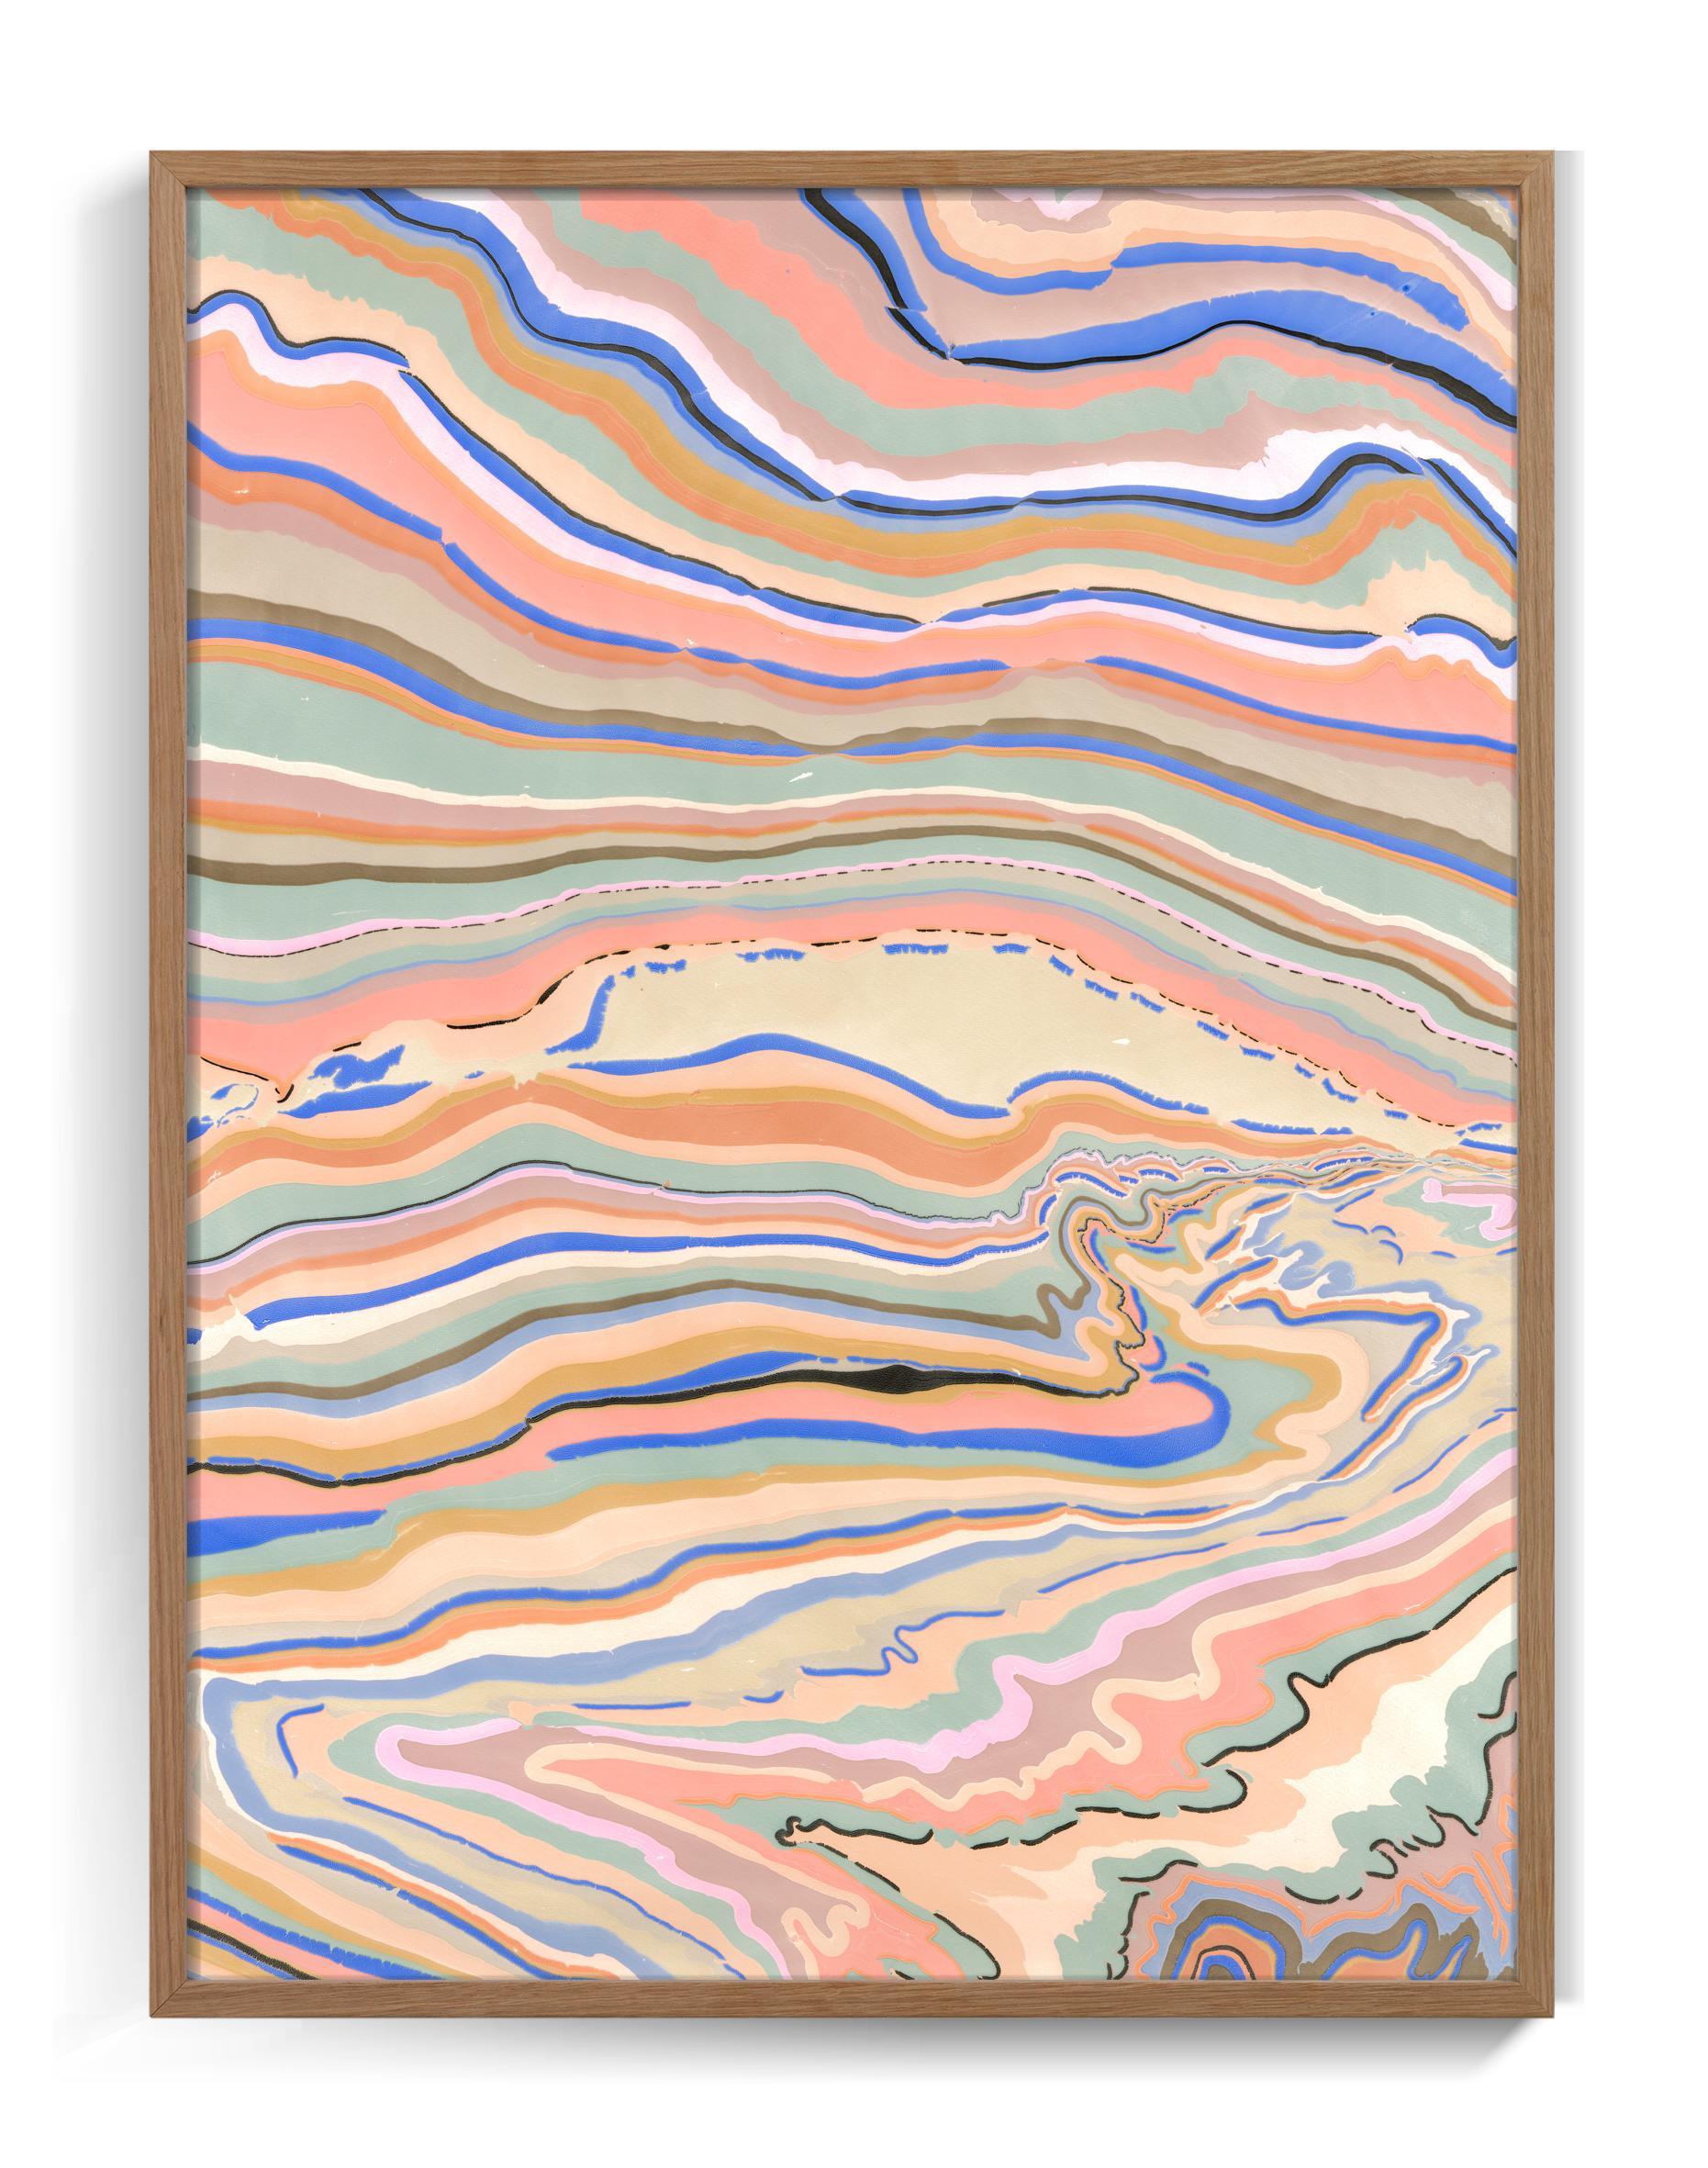 Danish artist Pernille Snedker’s unique marbling artwork—delicately weaving vibrant colored stripes into an intricate composition.
The piece harmoniously blends shades of blue with subtle hints of black, sand, lilac, light blue, salmon, and